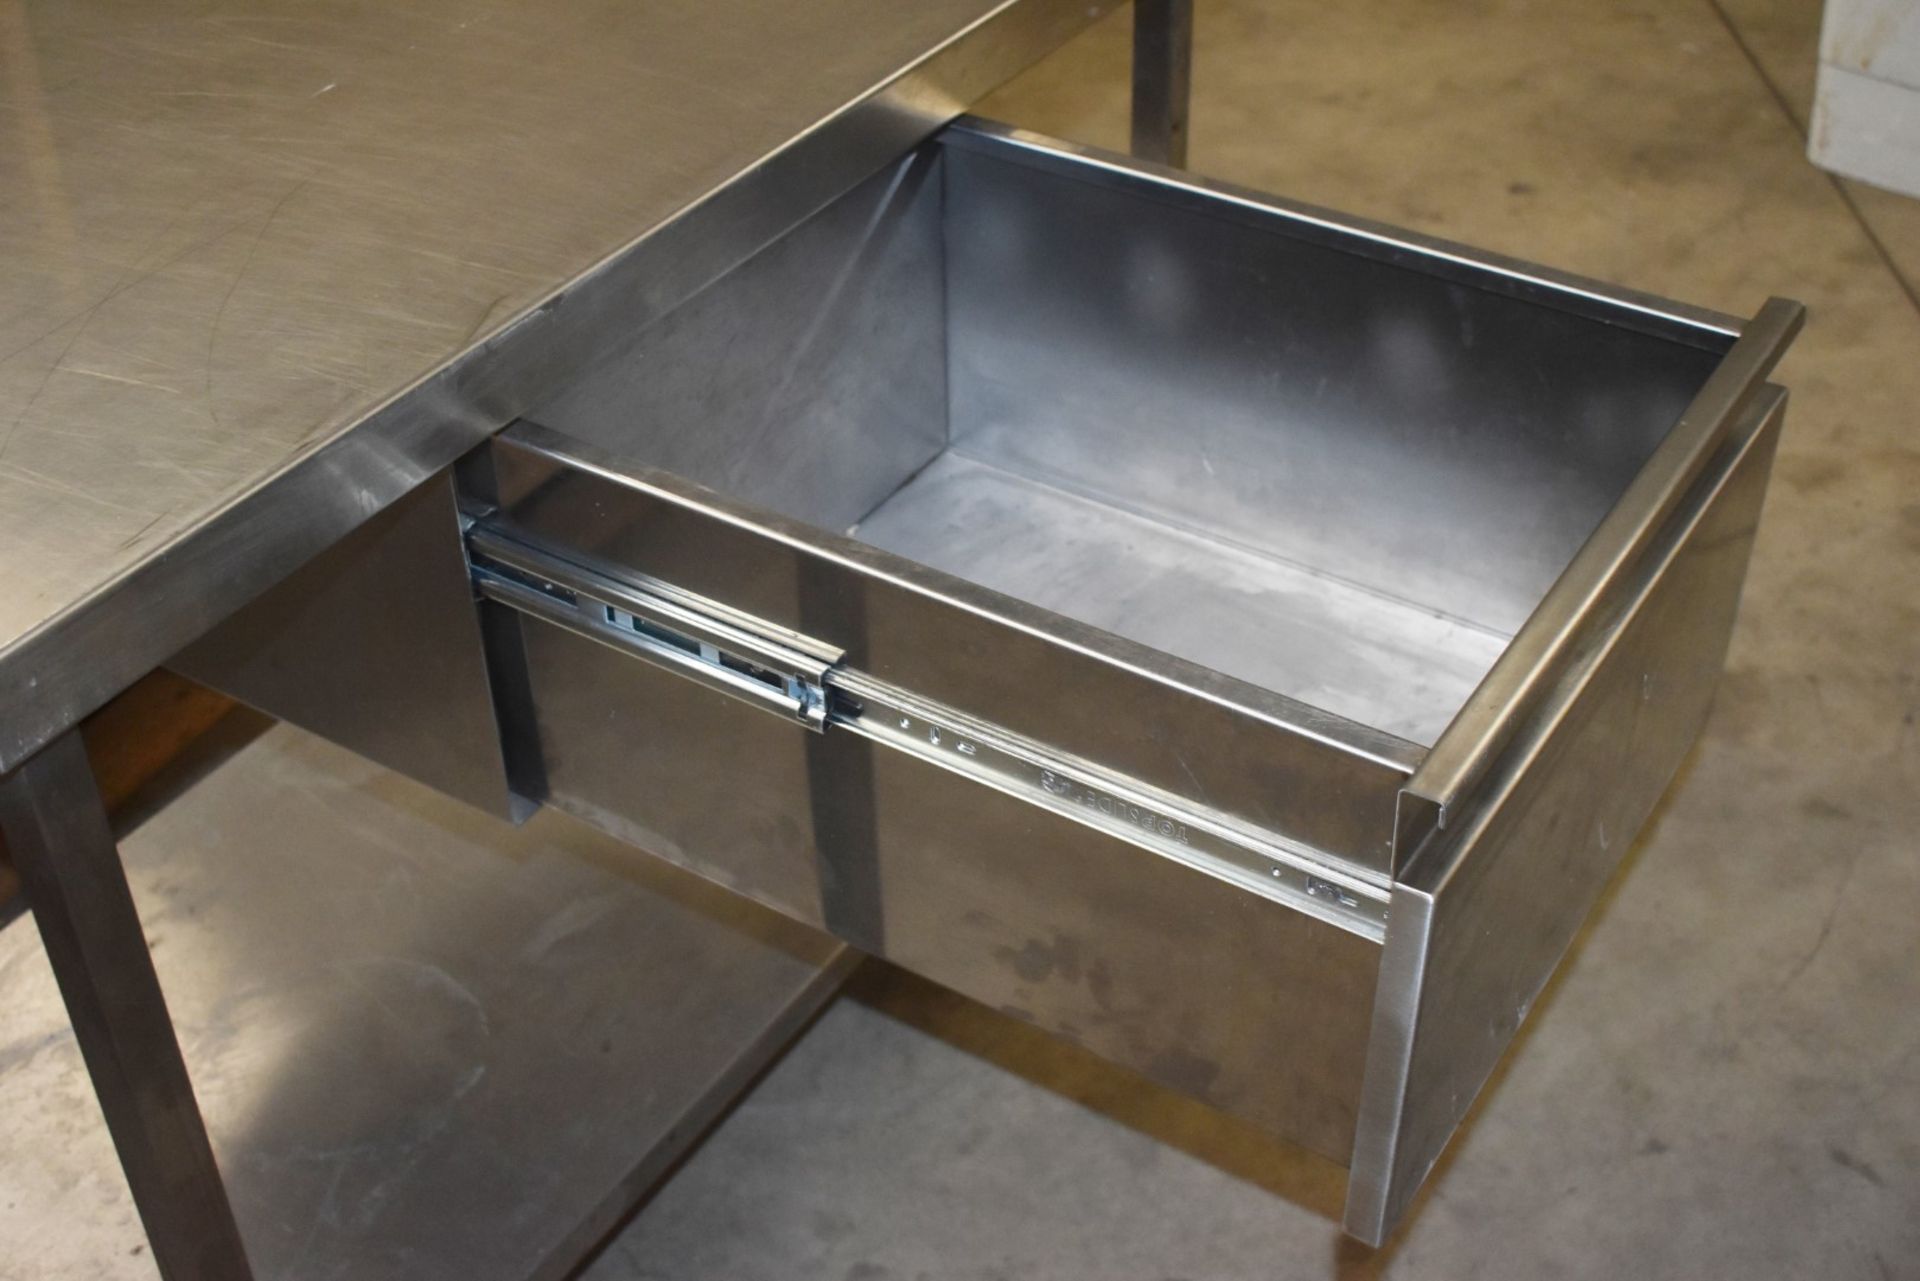 1 x Stainless Steel Prep Bench With Undershelf, Upstand and Central Drawer - H86 x W100 x D70 - Image 6 of 6